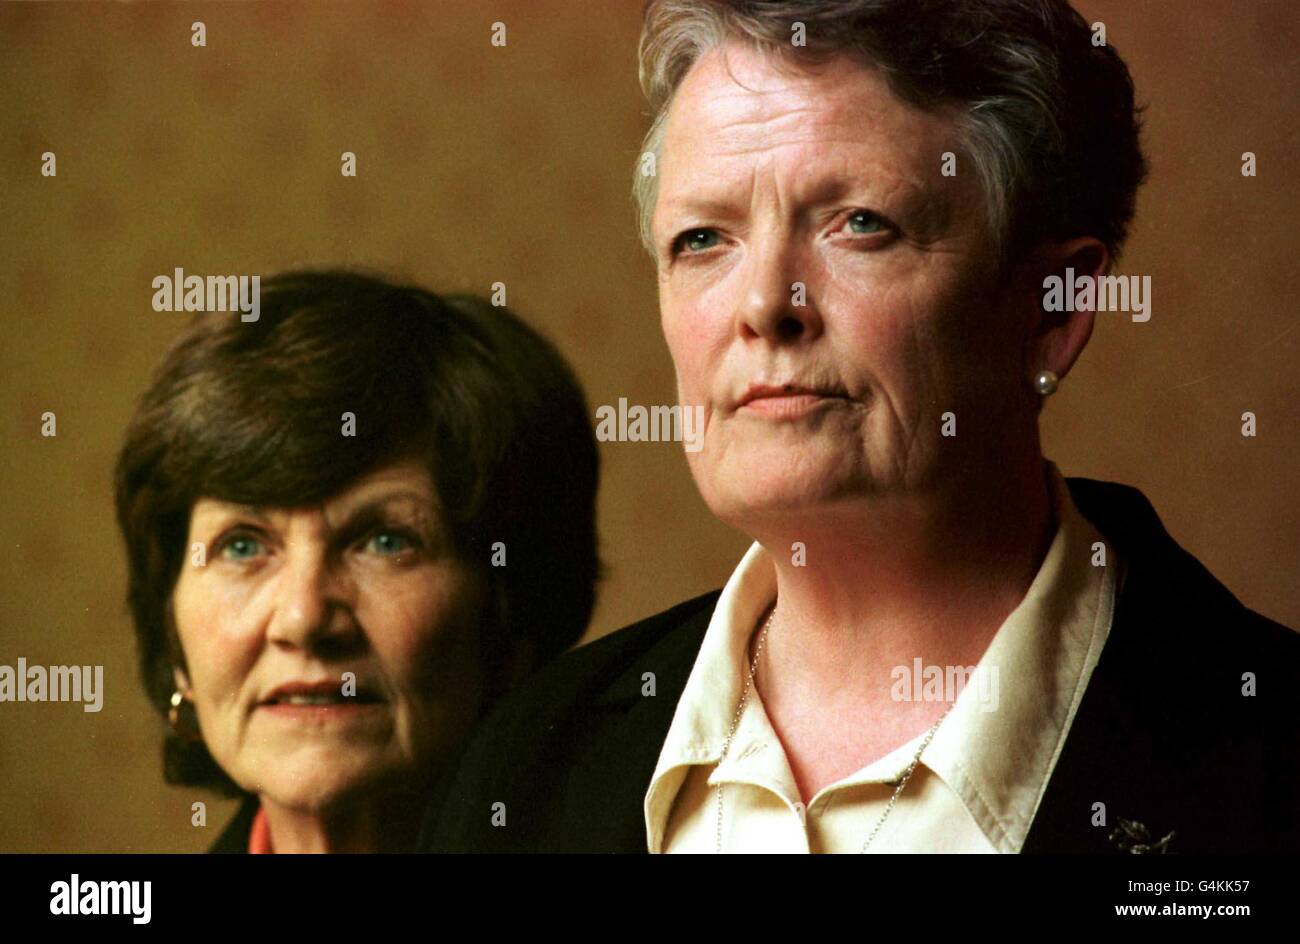 Phase Two chairperson and secretary, Helen Clark and Grace Morrison (r) respectively, at a news conference, as part of a group of women who claim to have developed health and reproductive problems due to working at a Greenock National Semiconductor plant. Stock Photo